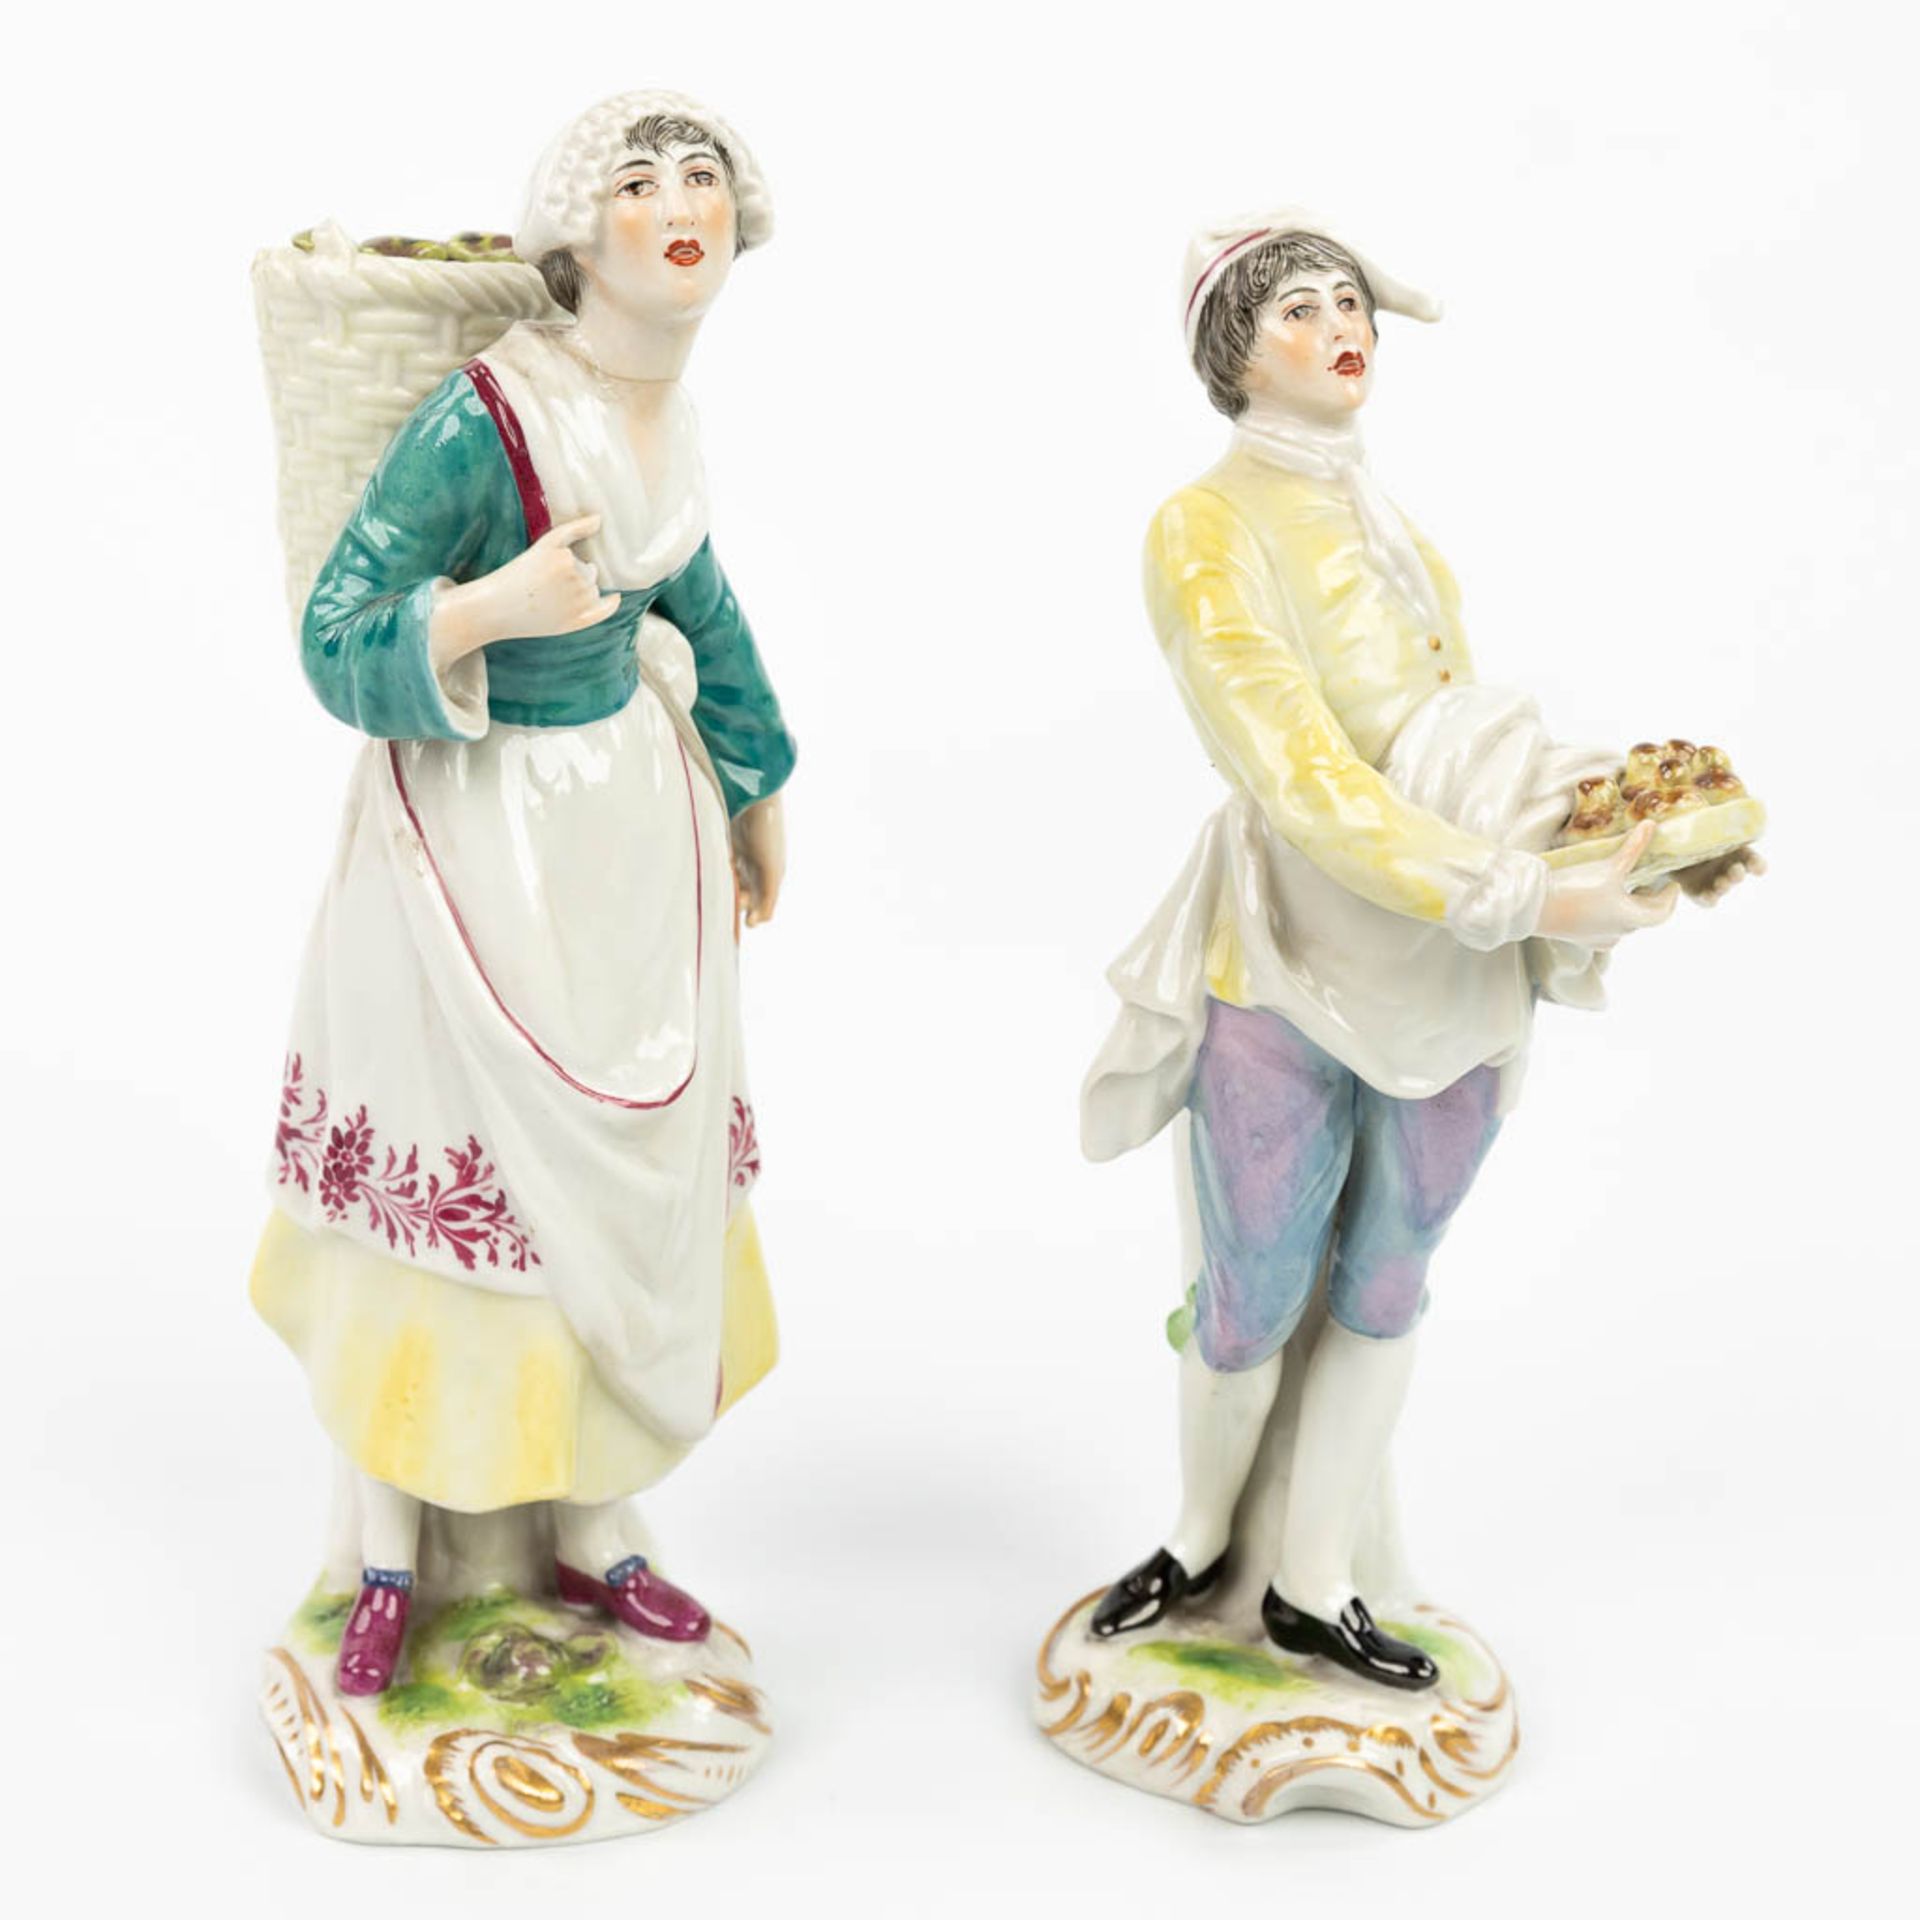 A pair of statues made of porcelain made in Germany and marked Ludwigsburg. (H:18cm) - Image 13 of 16